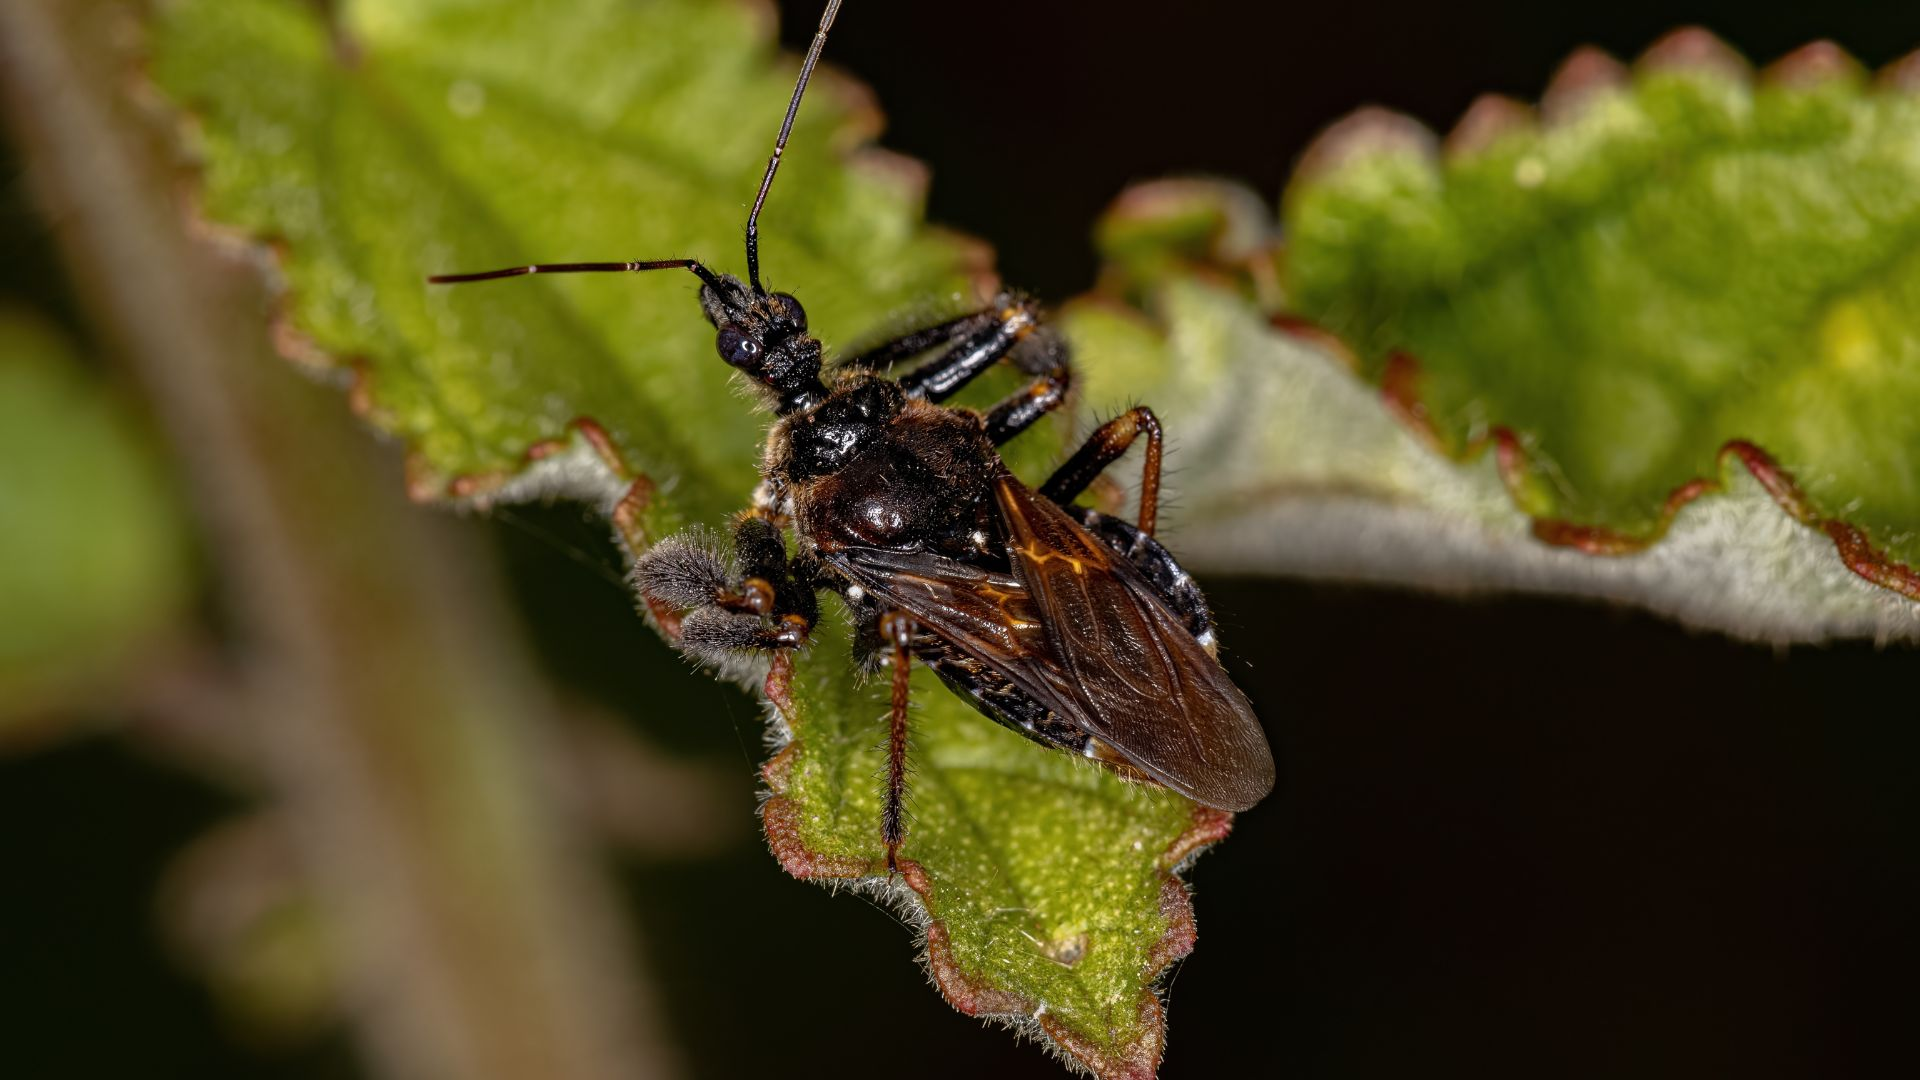 An image of an adult bee assassin bug on a green leaf.